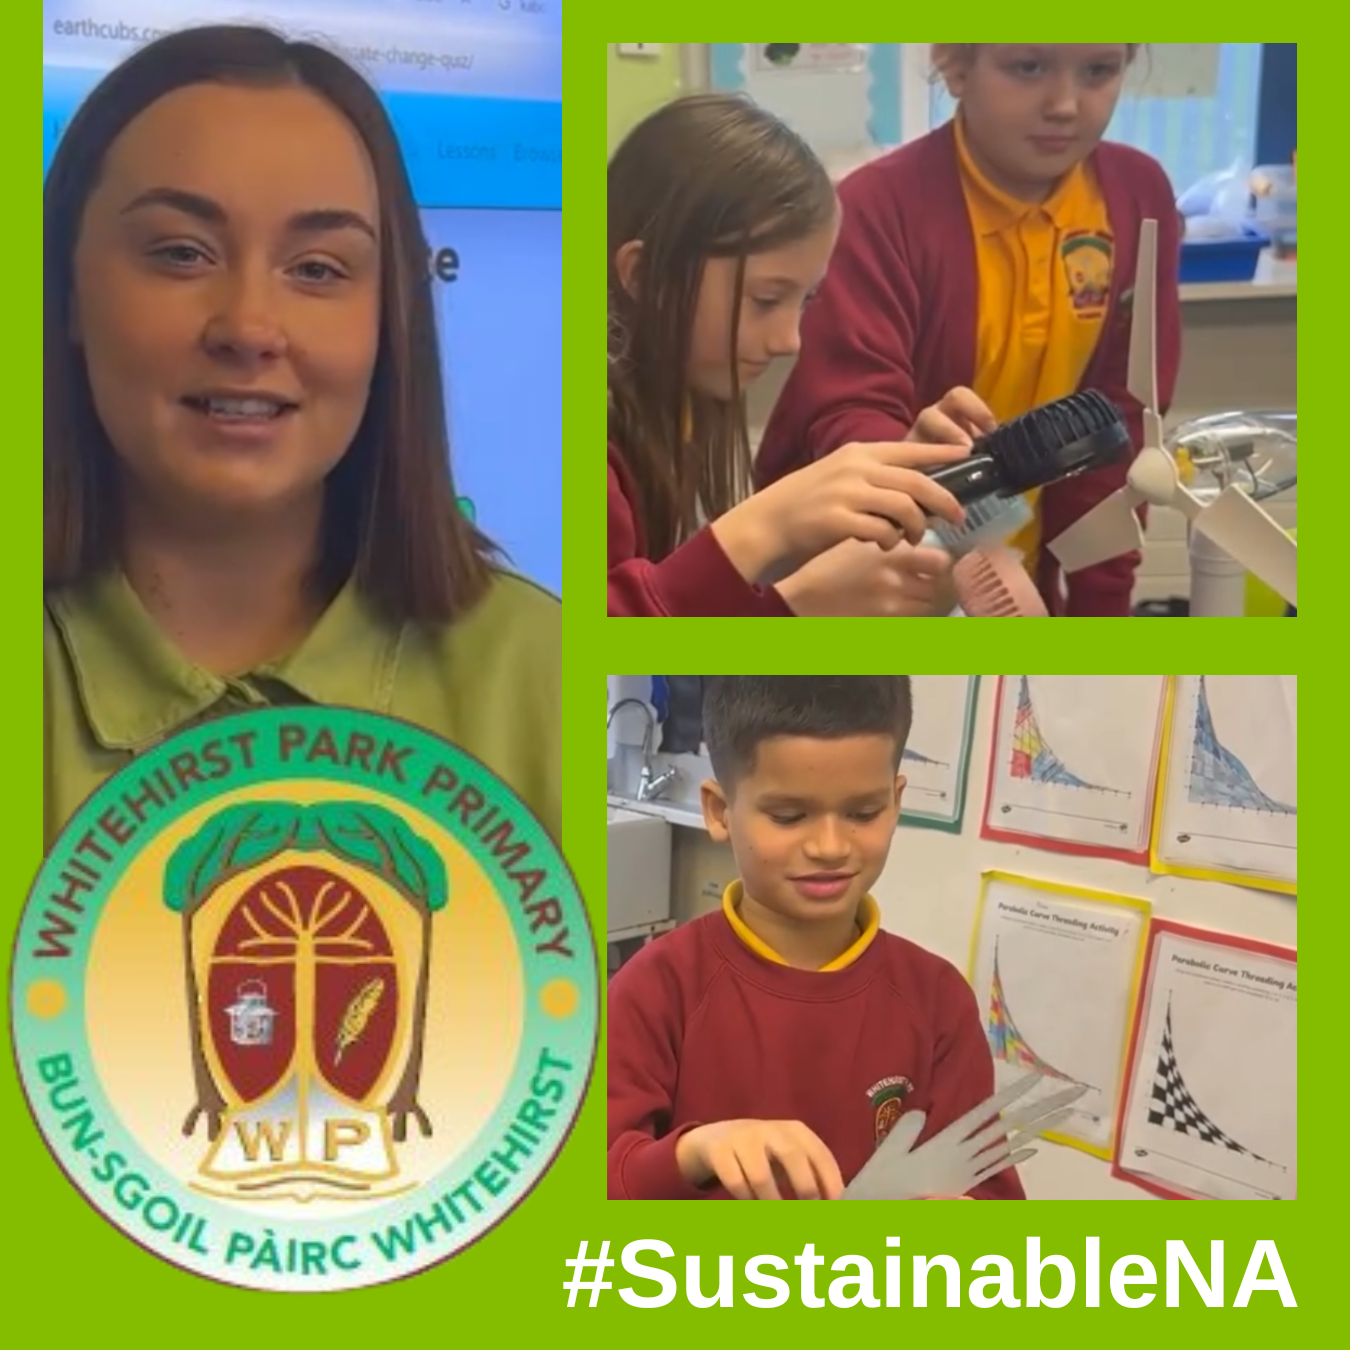 Collage of Energy Awareness session at Whitehirst Primary School with hashtag #SustainableNA